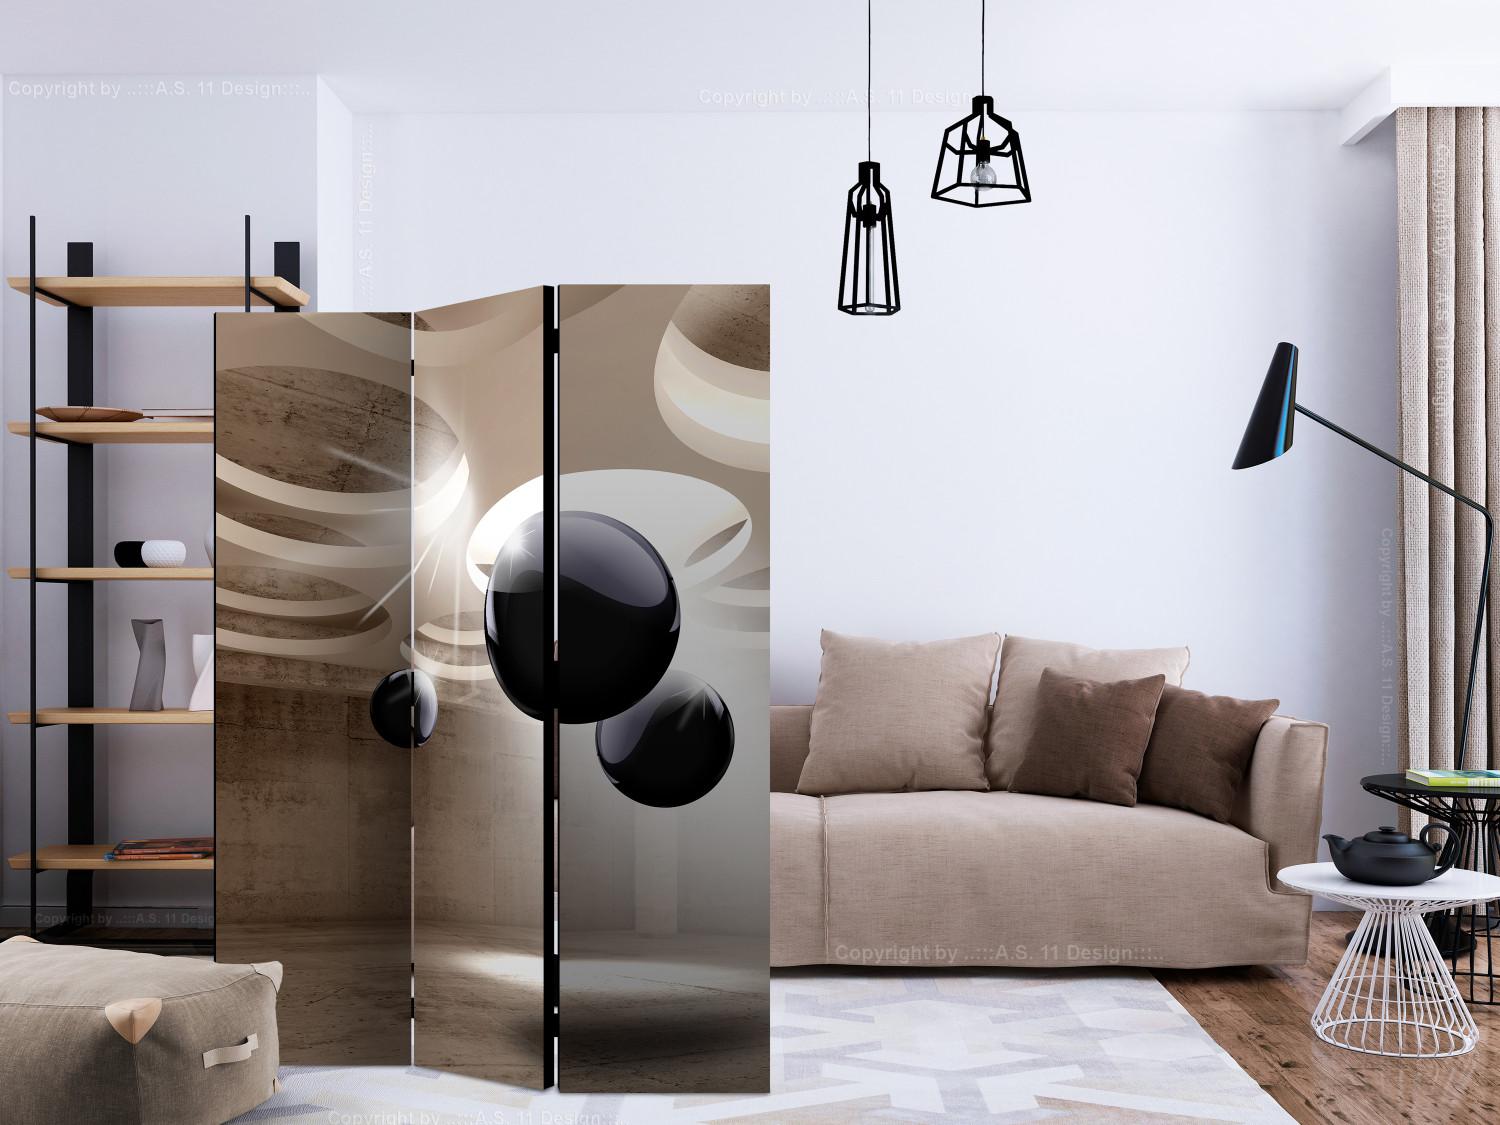 Room Divider Geometric Brilliance - geometric figures in space with a 3D illusion